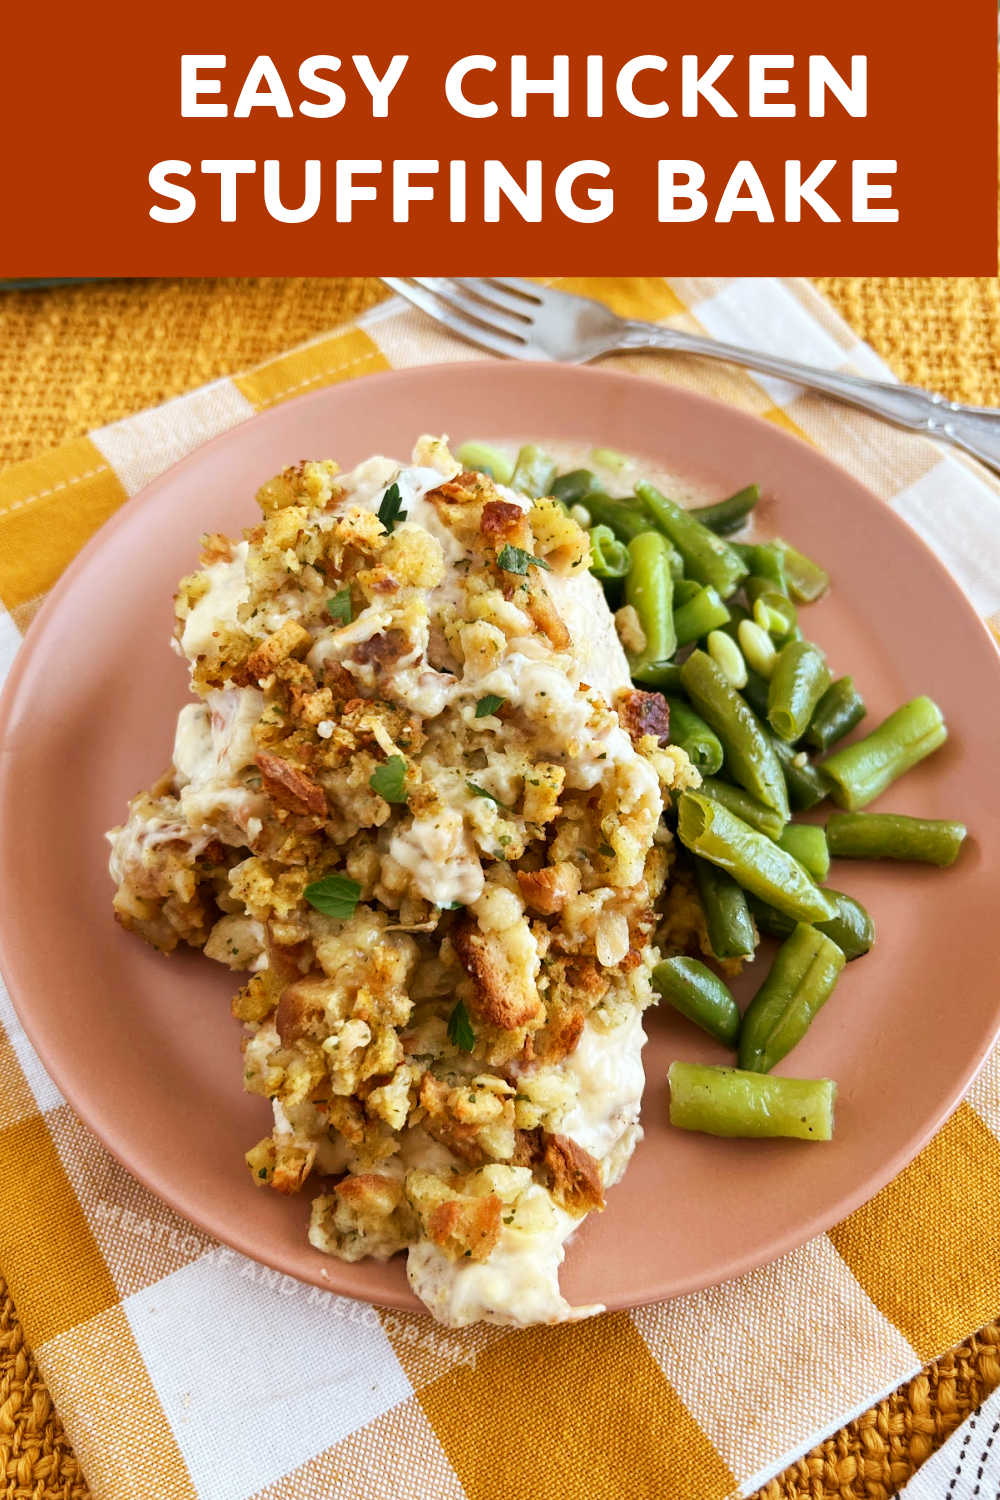 Easy Chicken Stuffing Bake is an easy dinner recipe with chicken breasts and Stove Top stuffing mix baked into a hearty casserole. Add green beans or your favorite veggies for a complete meal the whole family will love. via @meamel